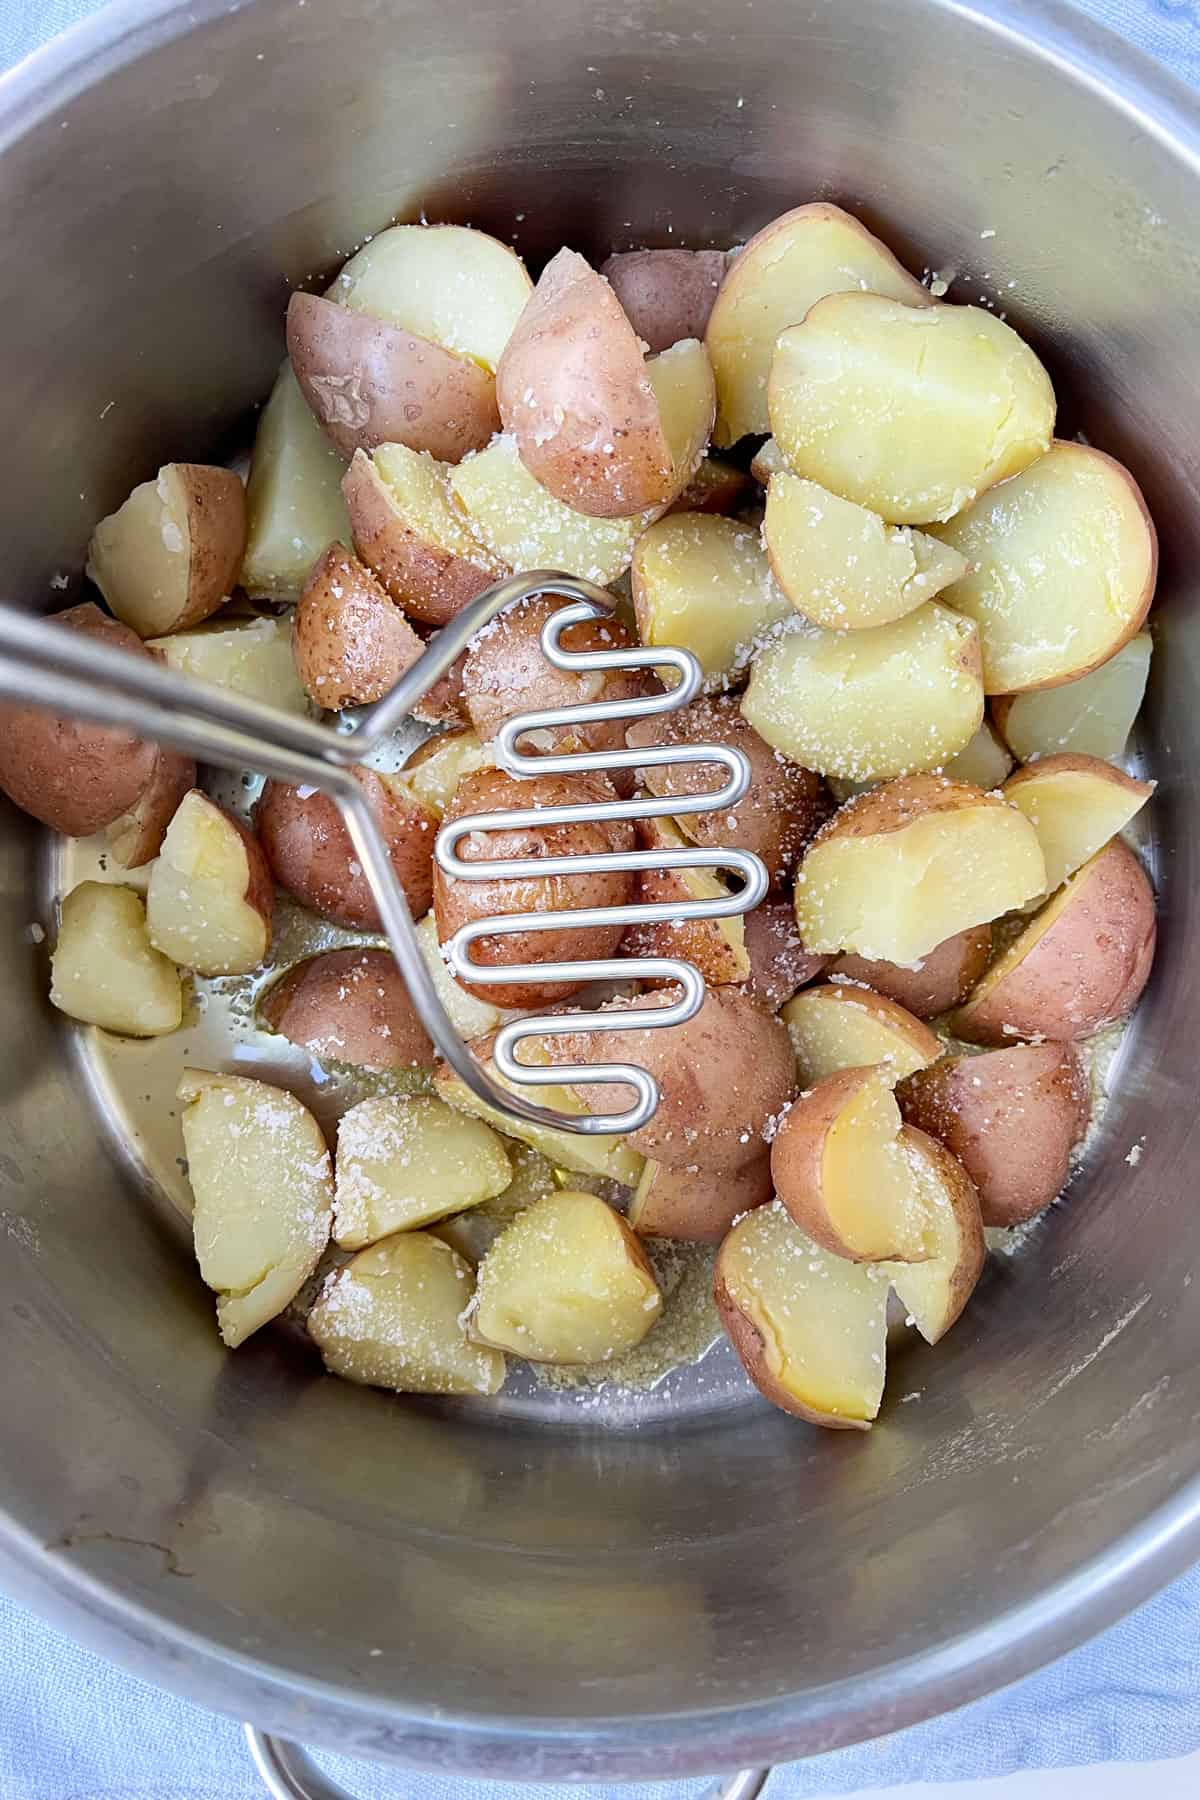 potato masher about to mash boiled red skin potatoes that are in a silver cooking pot